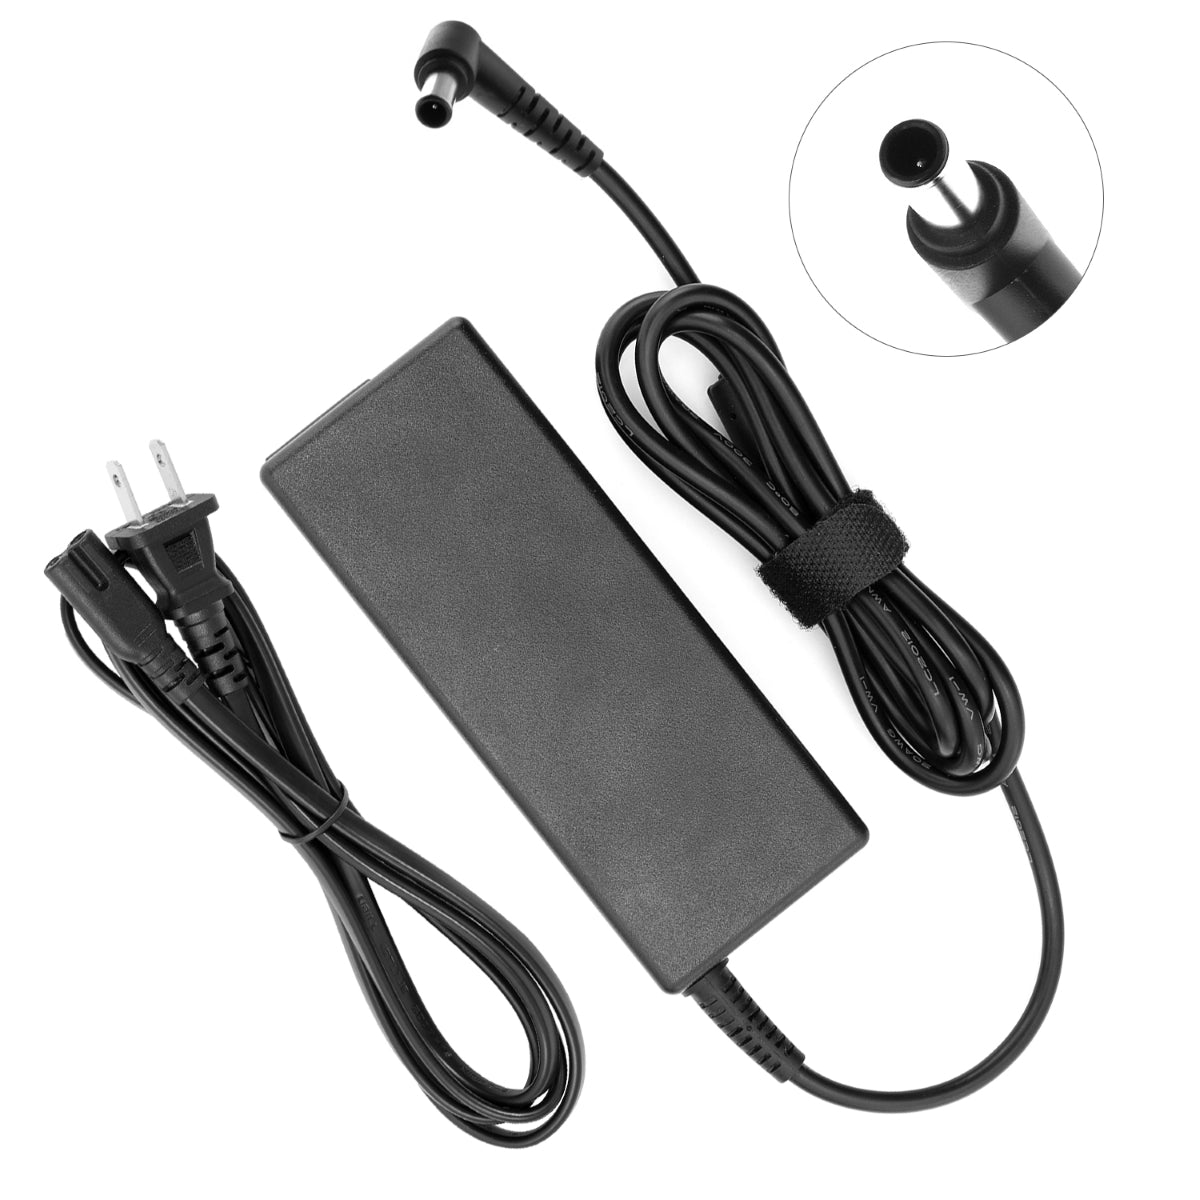 Power Adapter for LG 29WL500-B Monitor TV